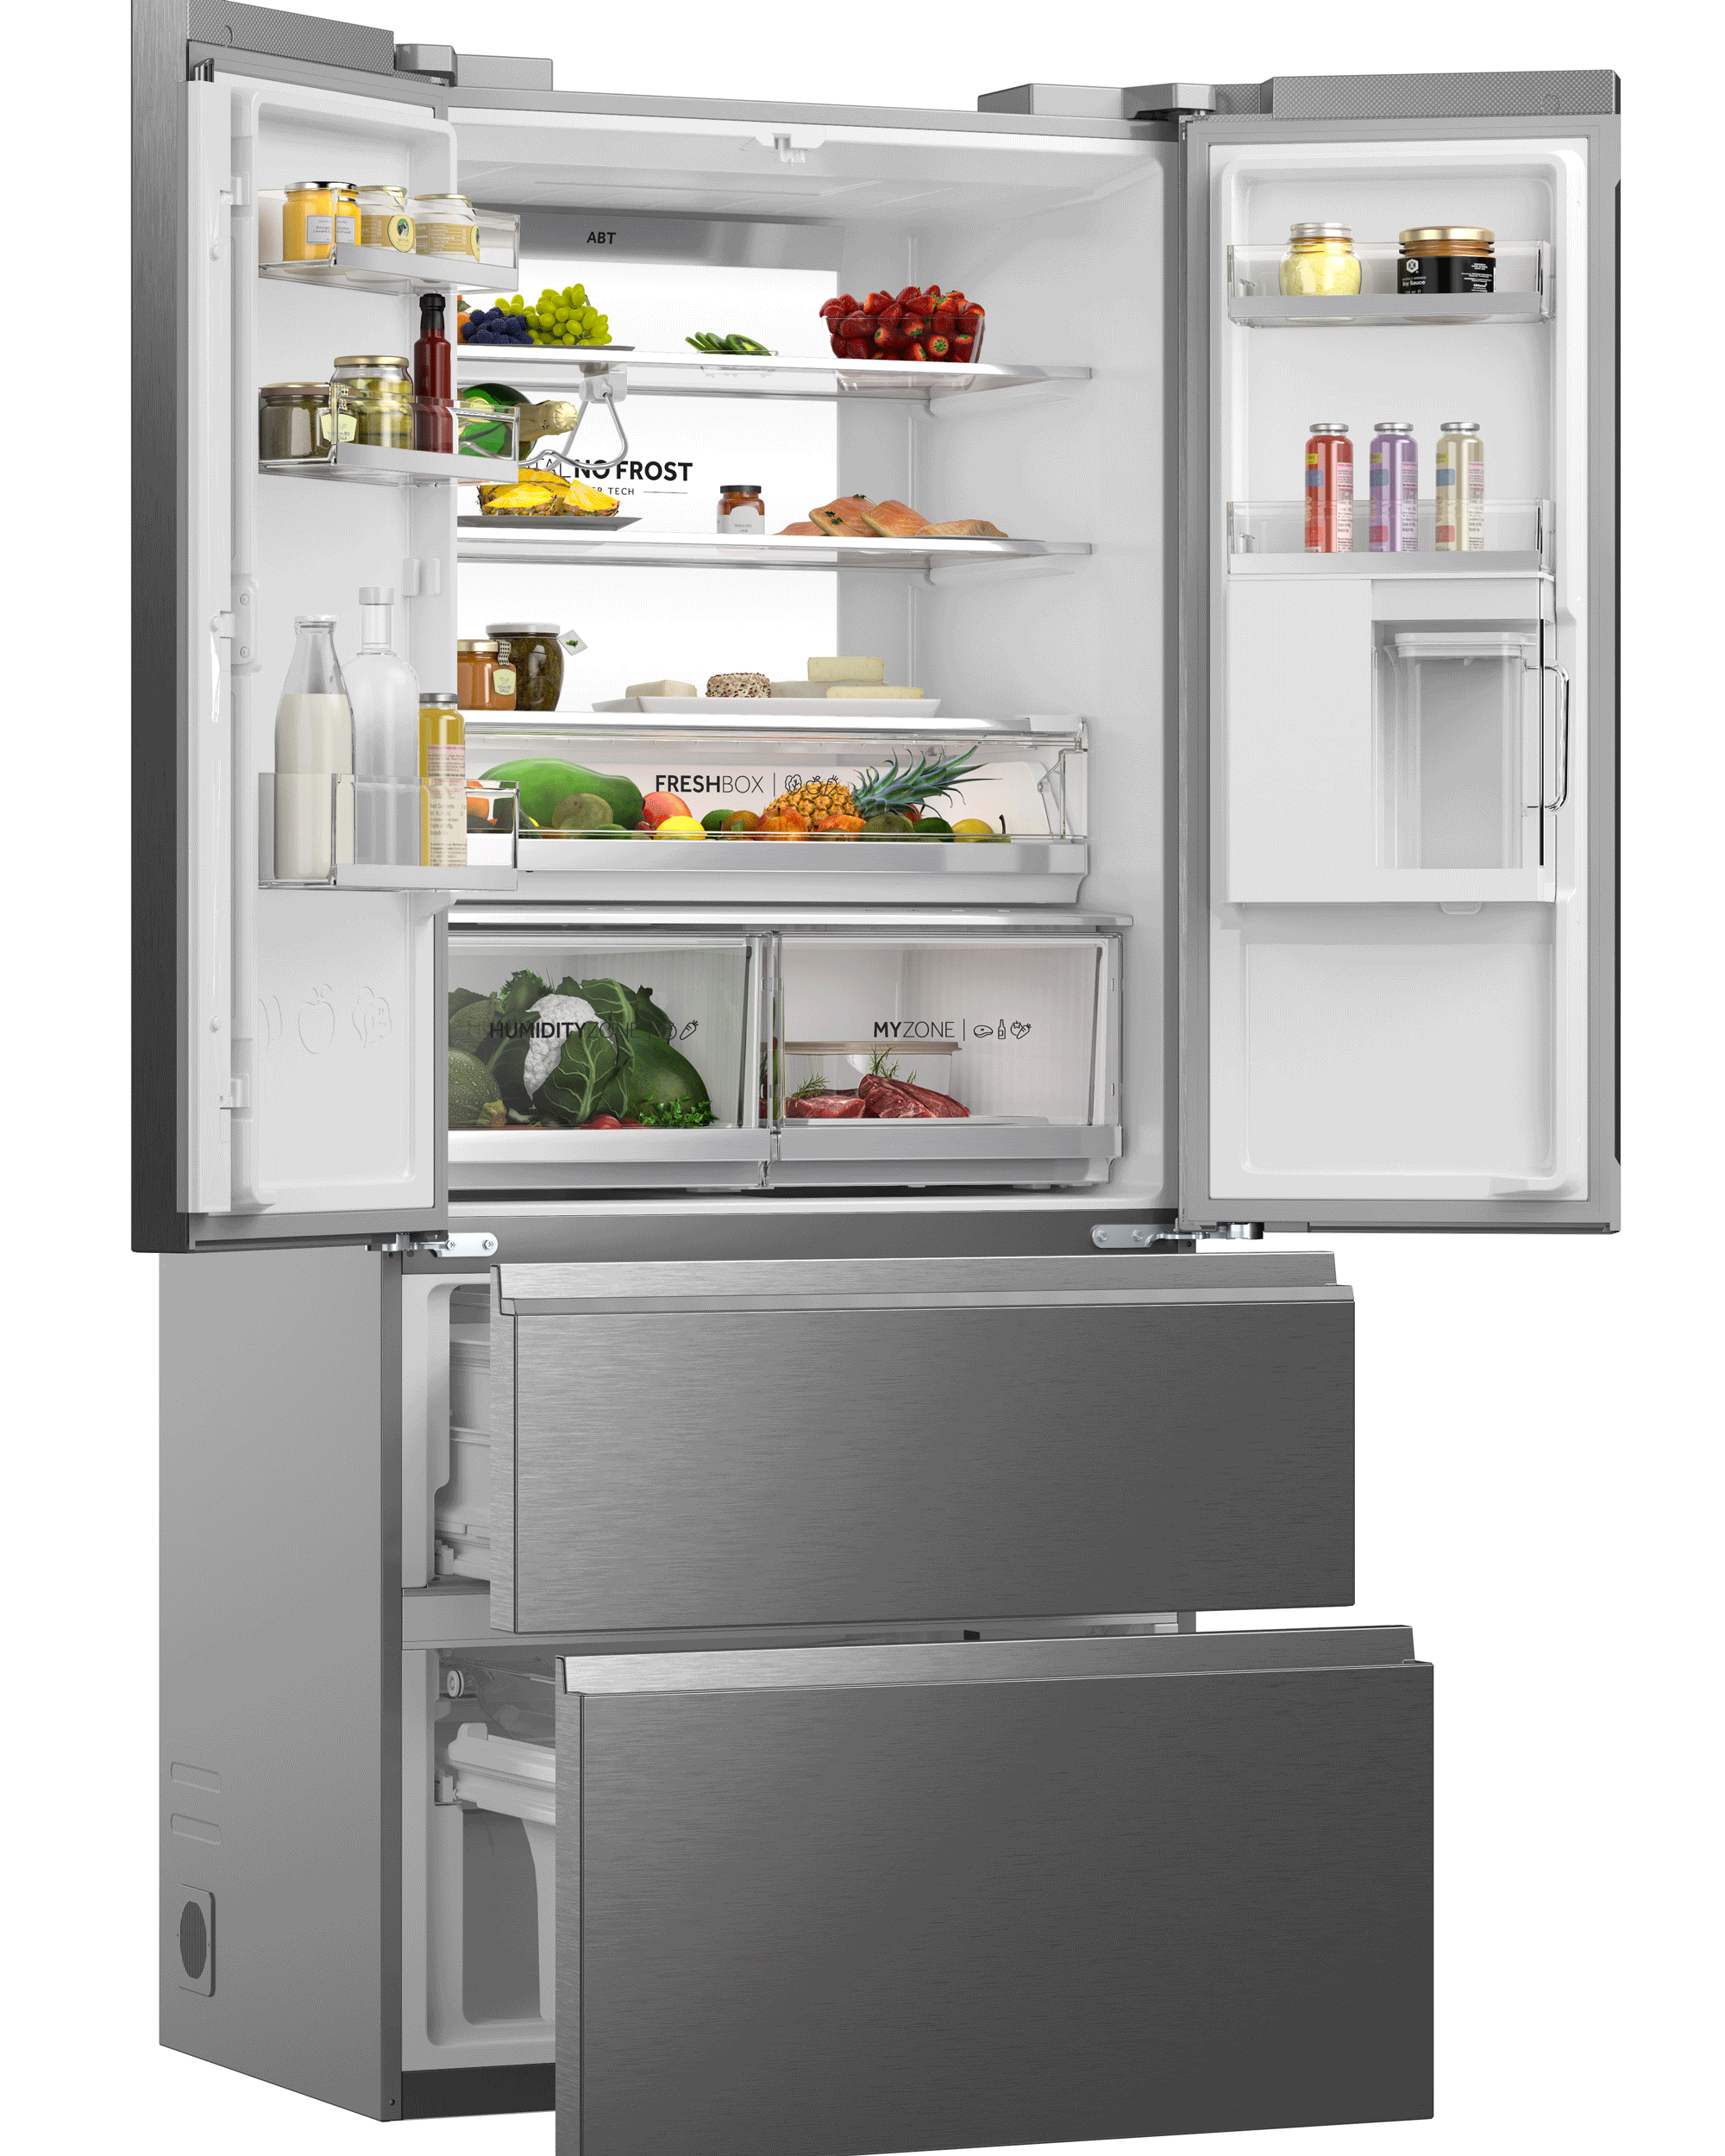 Learn how to store food correctly in a Haier fridge freezer